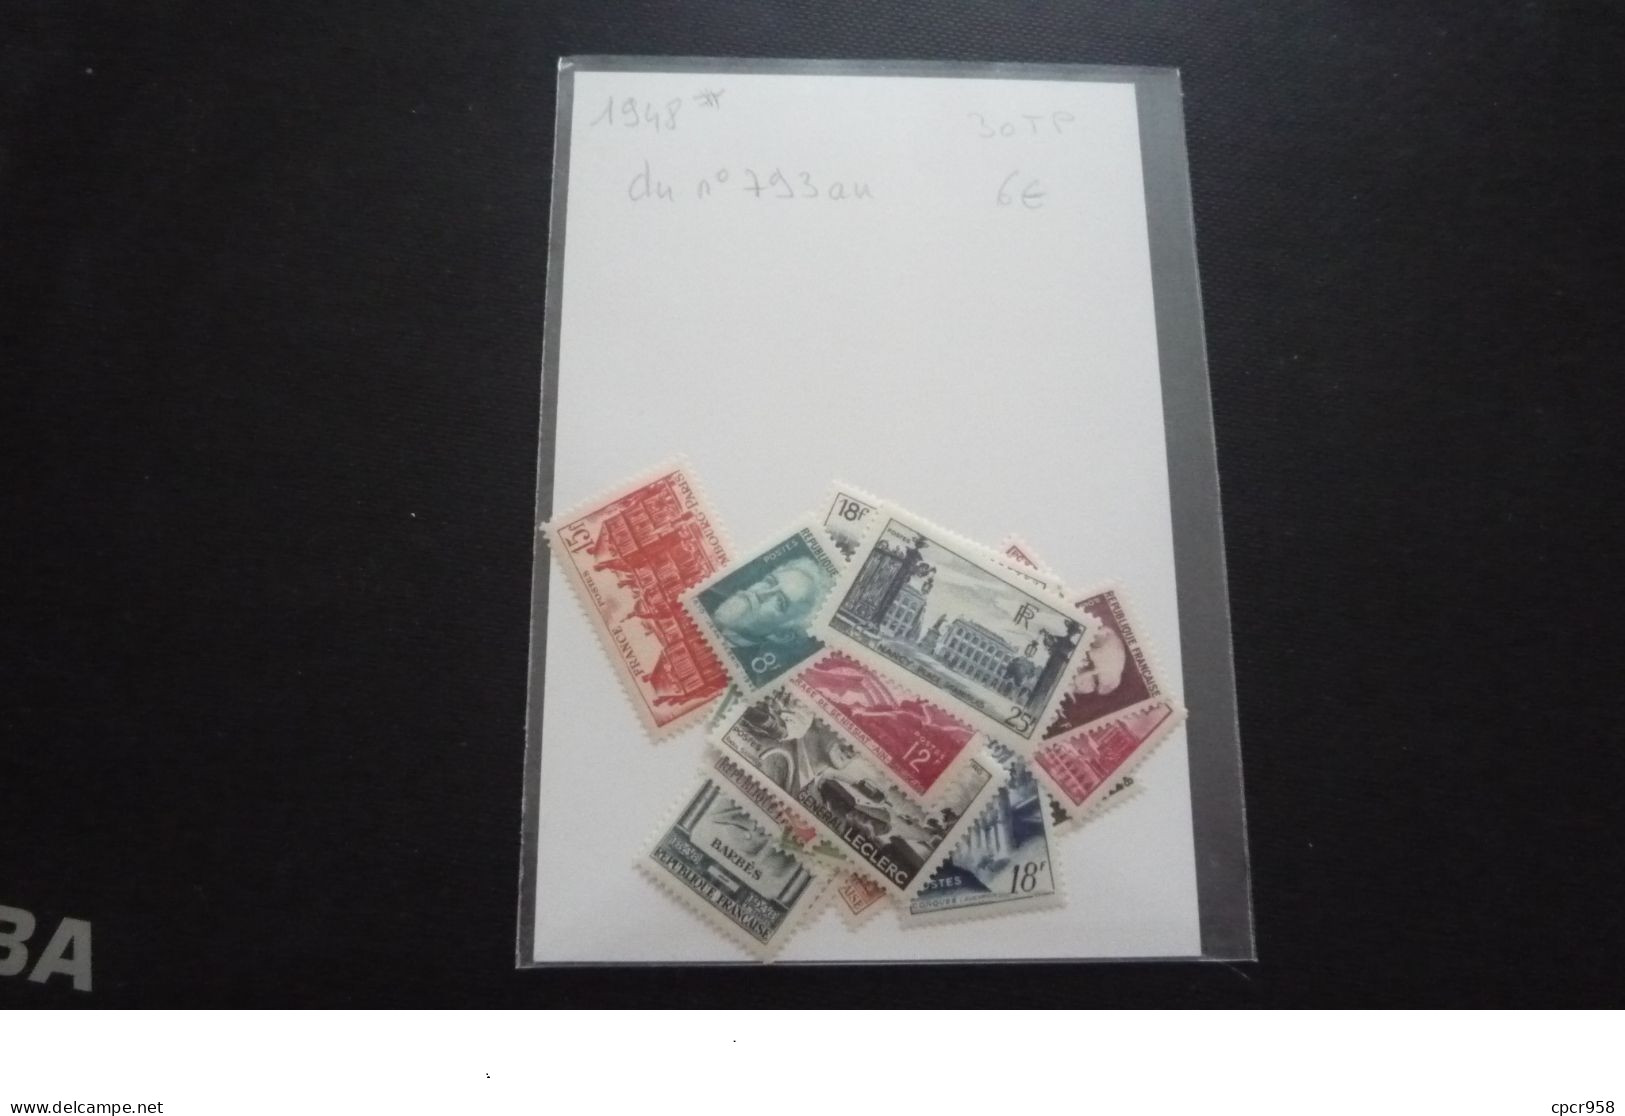 Timbre - N°206361 - France .1948. Neuf* Du N) 823 Au ... 30 Timbres - 1940-1949